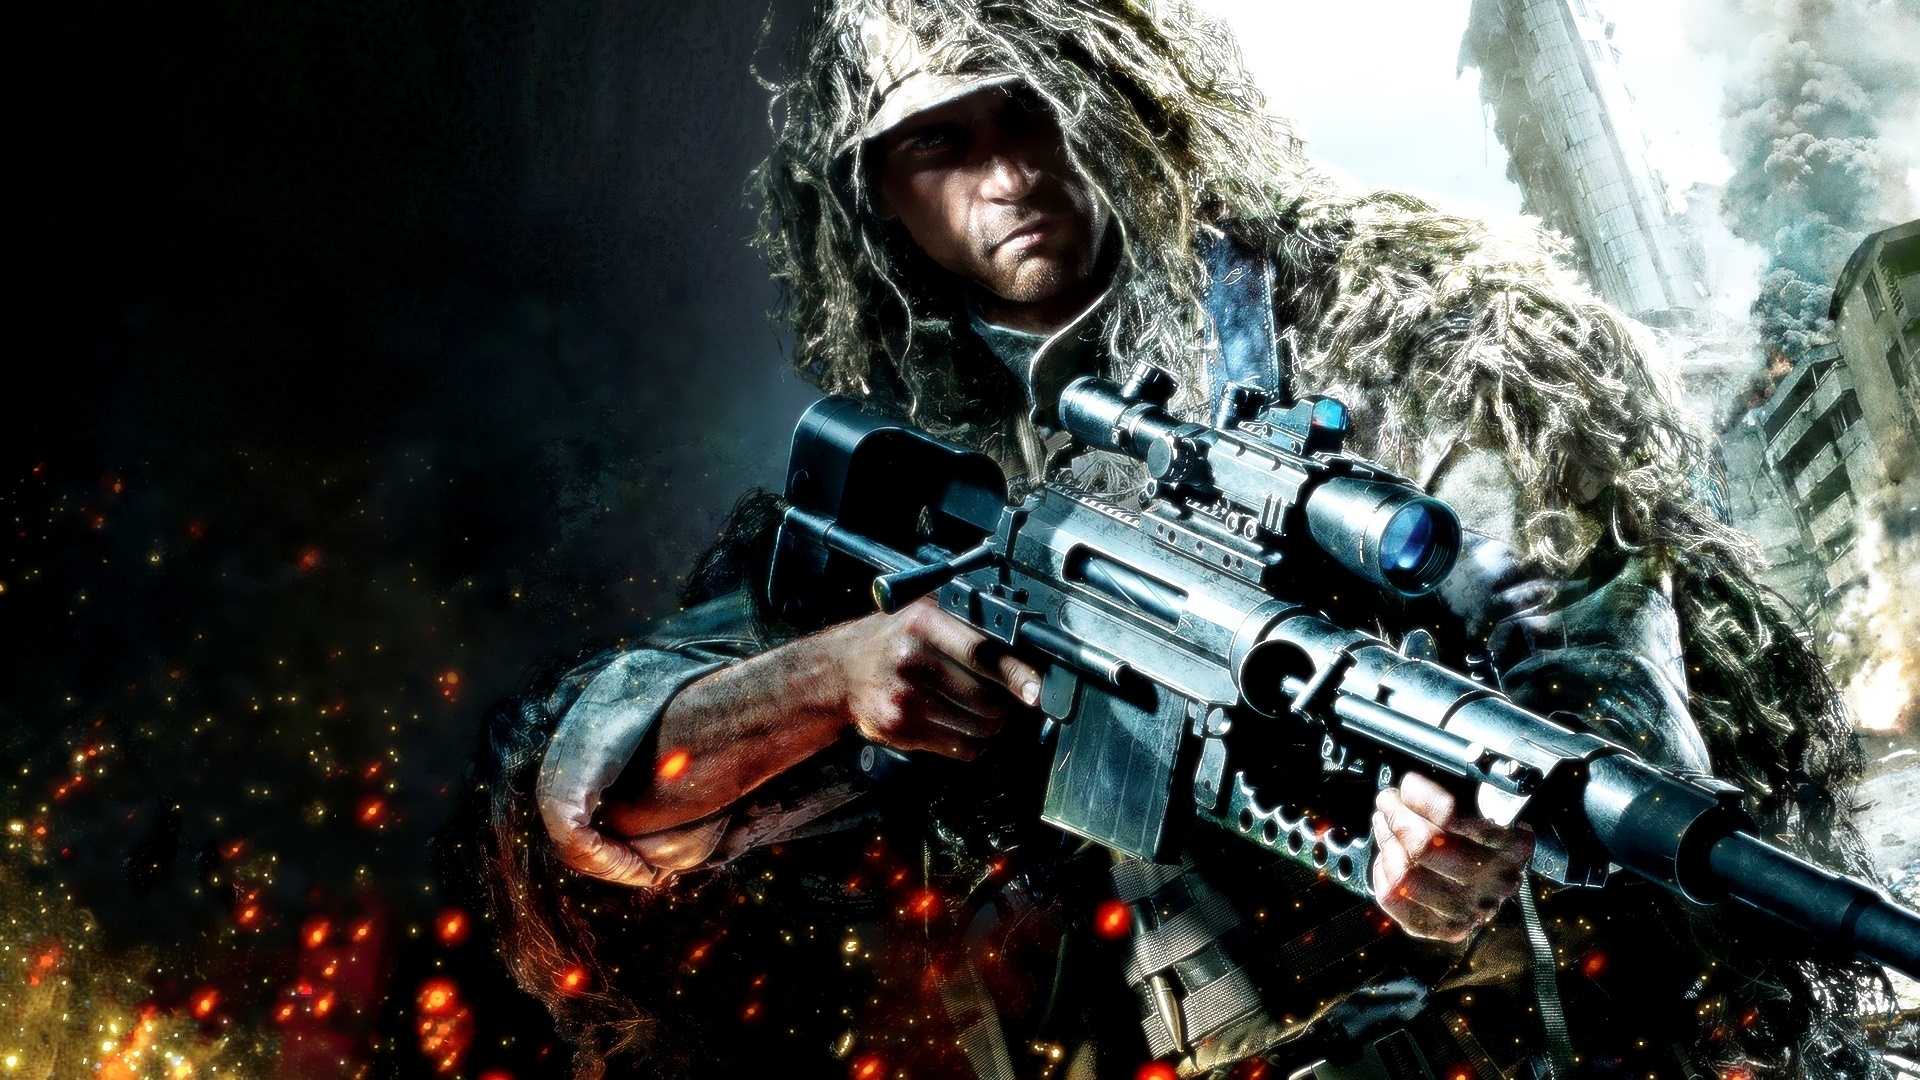 Collection Of Army Hd Wallpapers On Spyder Wallpapers - Sniper Ghost Warrior 2 - HD Wallpaper 